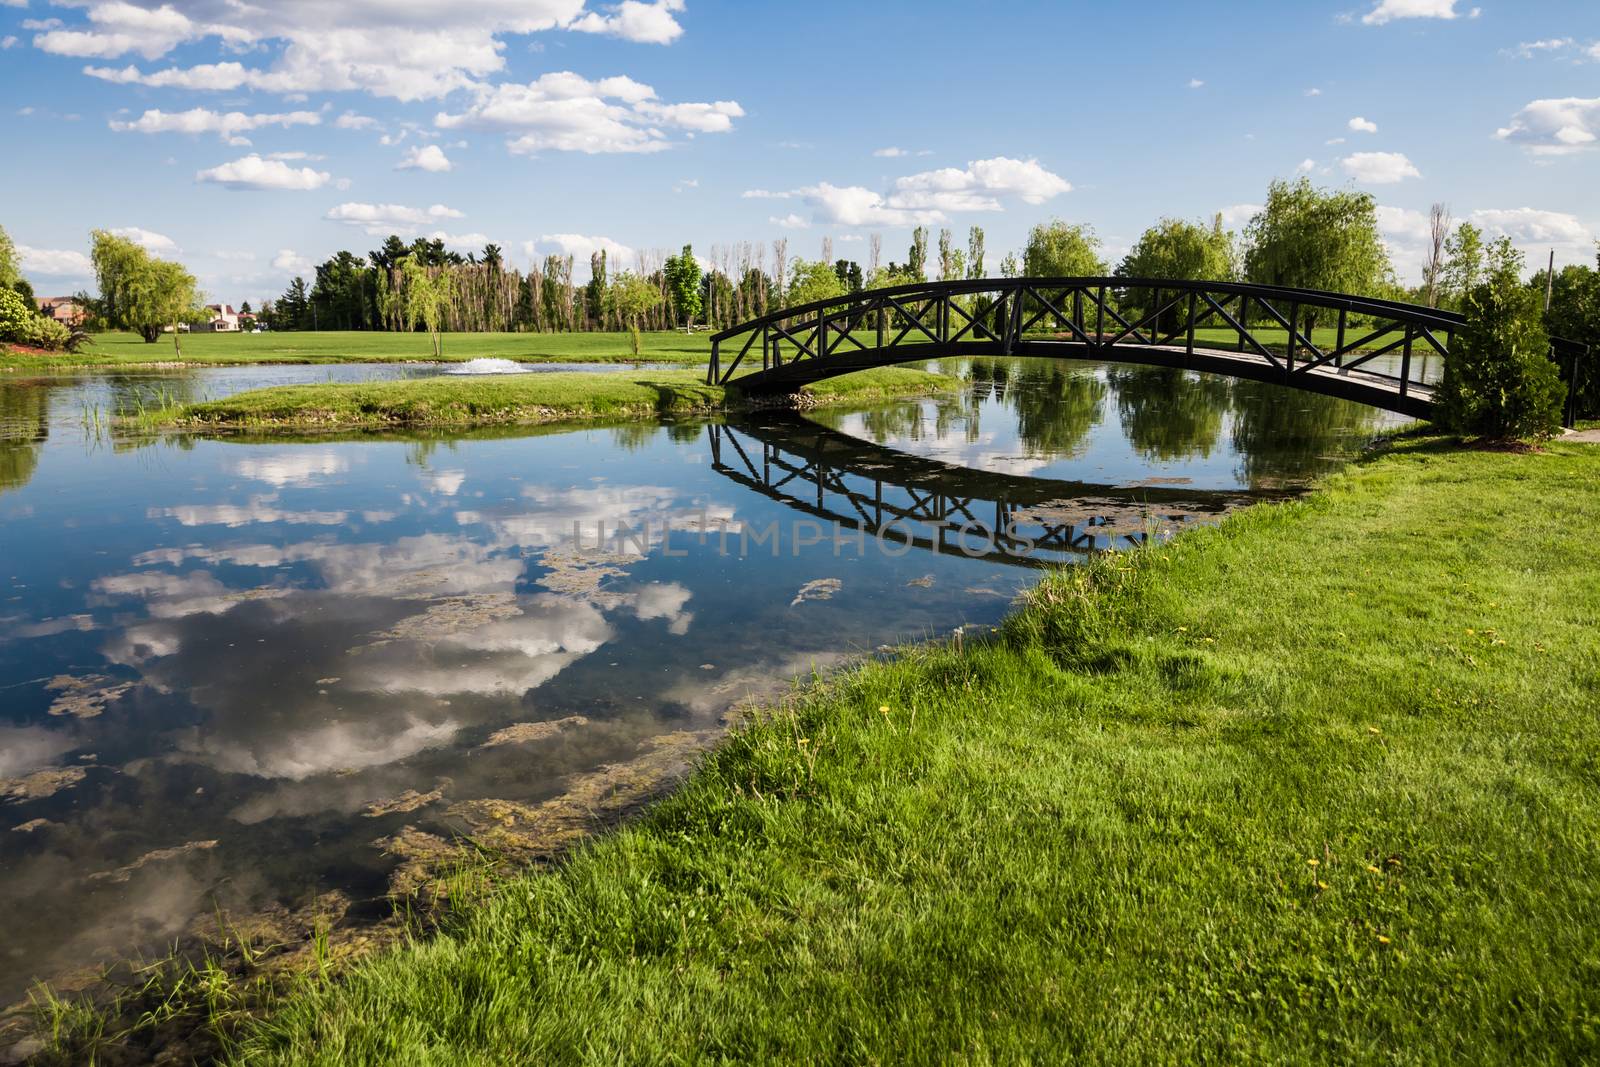 Little Bridge Over a Pond by aetb